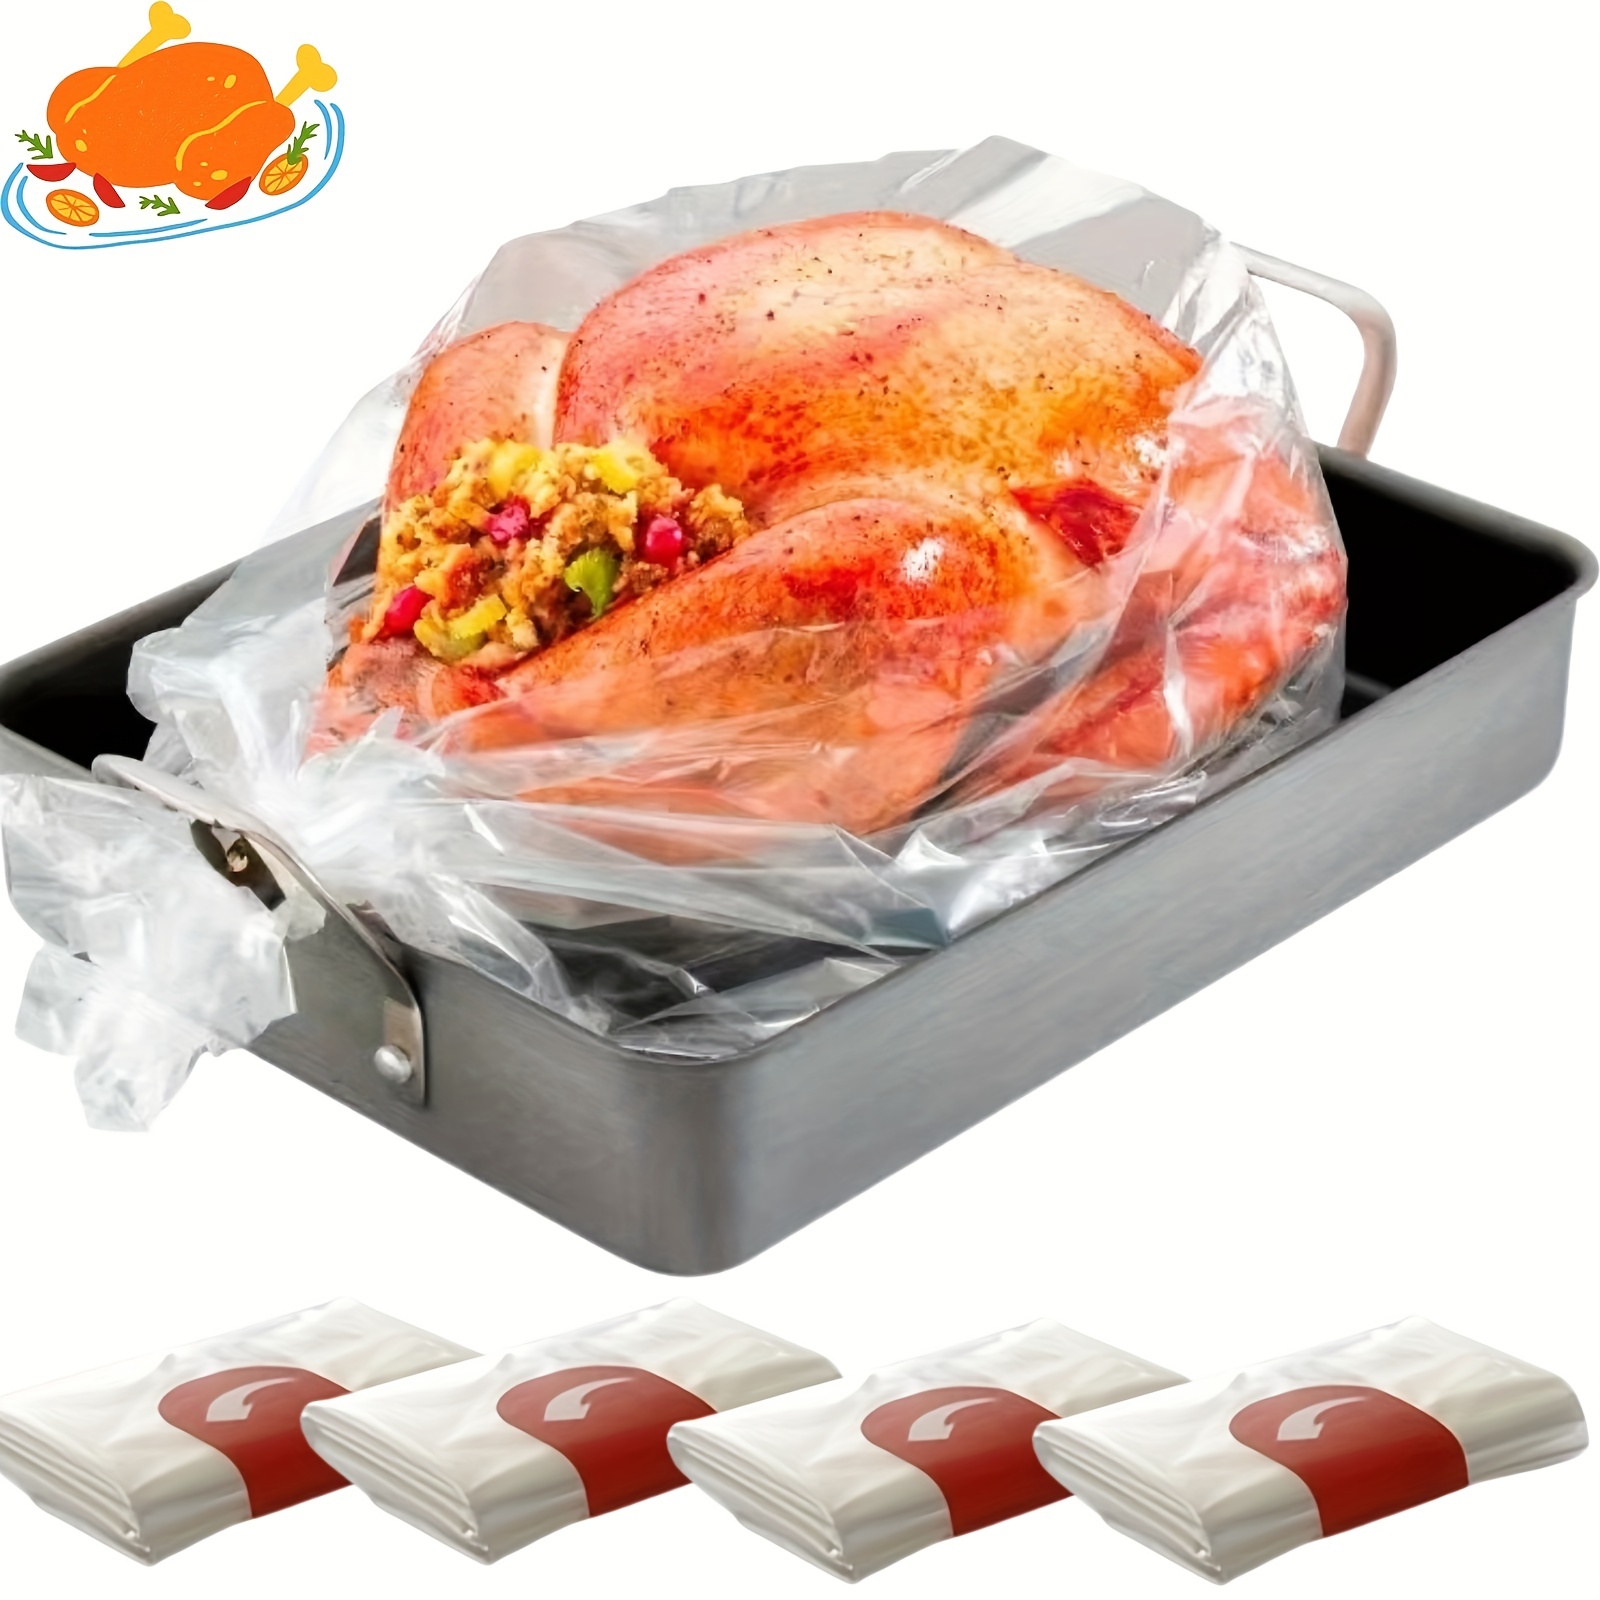 Oven Bags For Cooking, Meat Baking Bags, Meat Chicken Fish